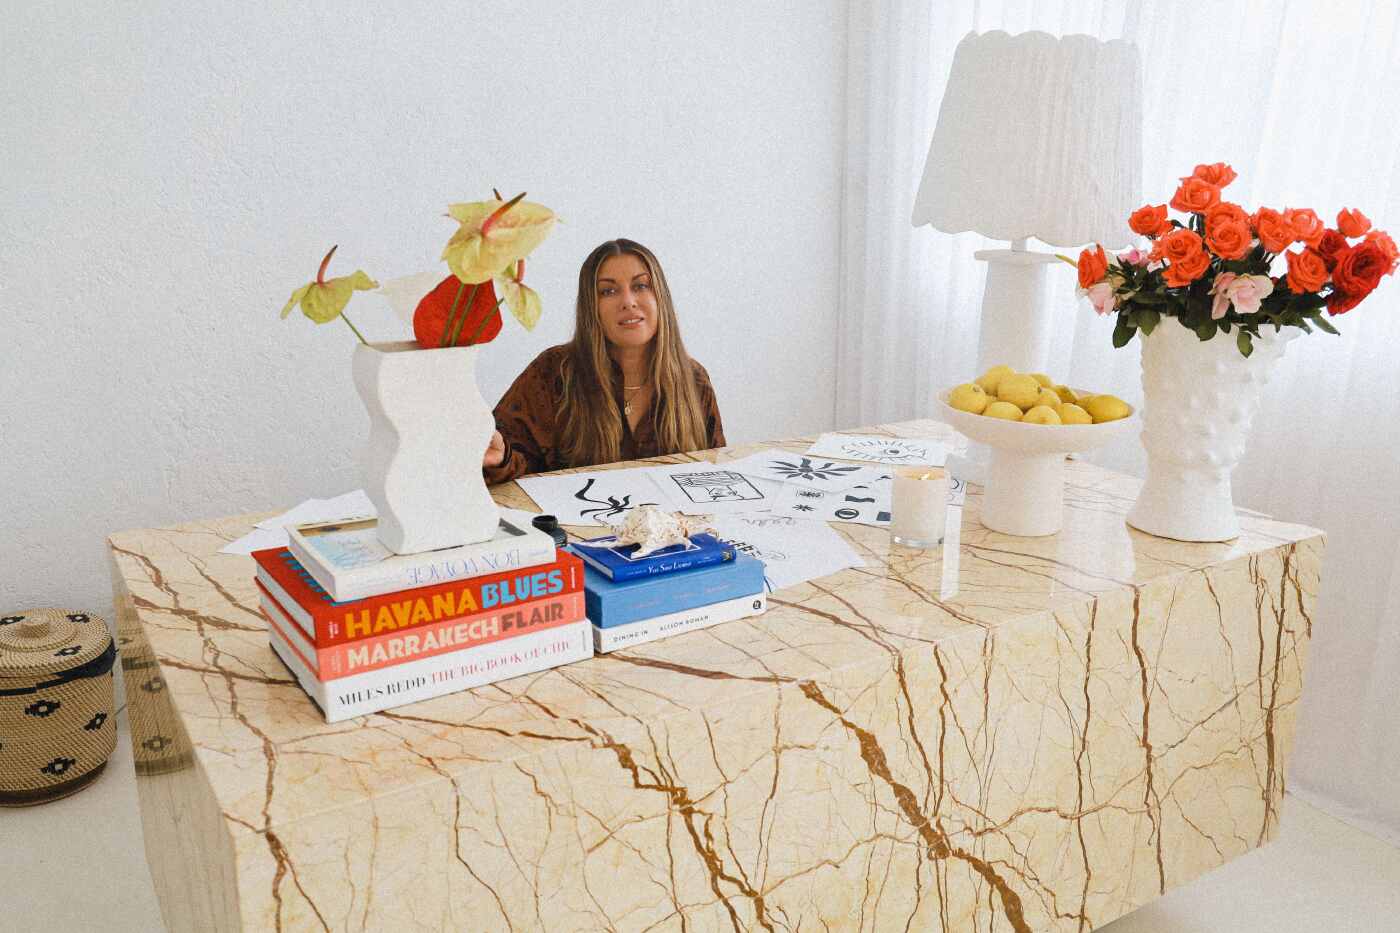 Digital nomad, Sophie bell sits at her desk in a luxe location